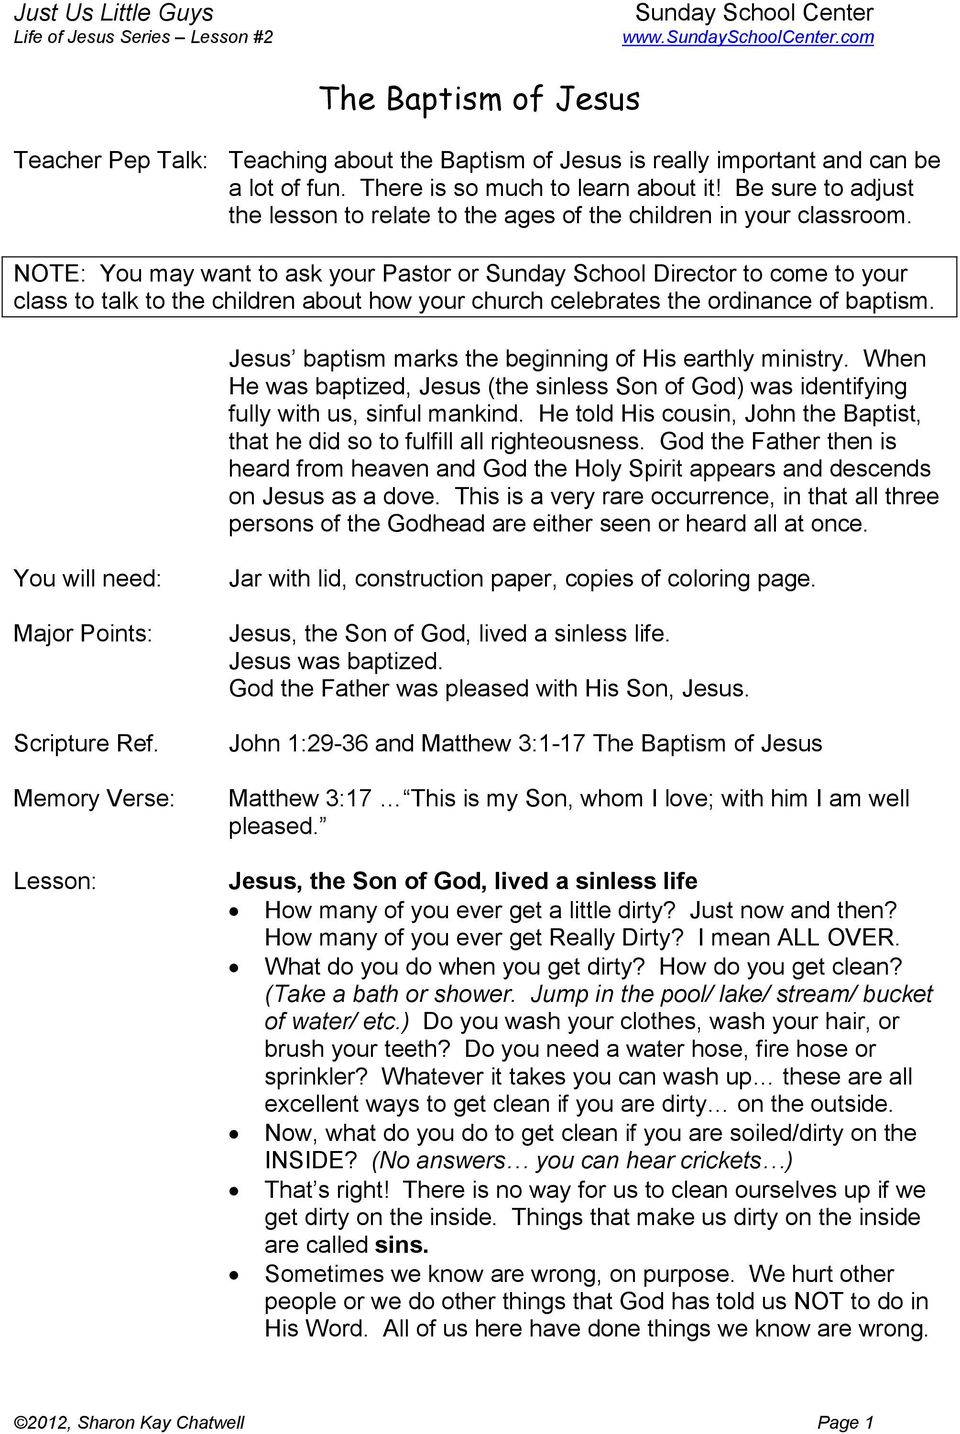 NOTE: You may want to ask your Pastor or Sunday School Director to come to your class to talk to the children about how your church celebrates the ordinance of baptism.